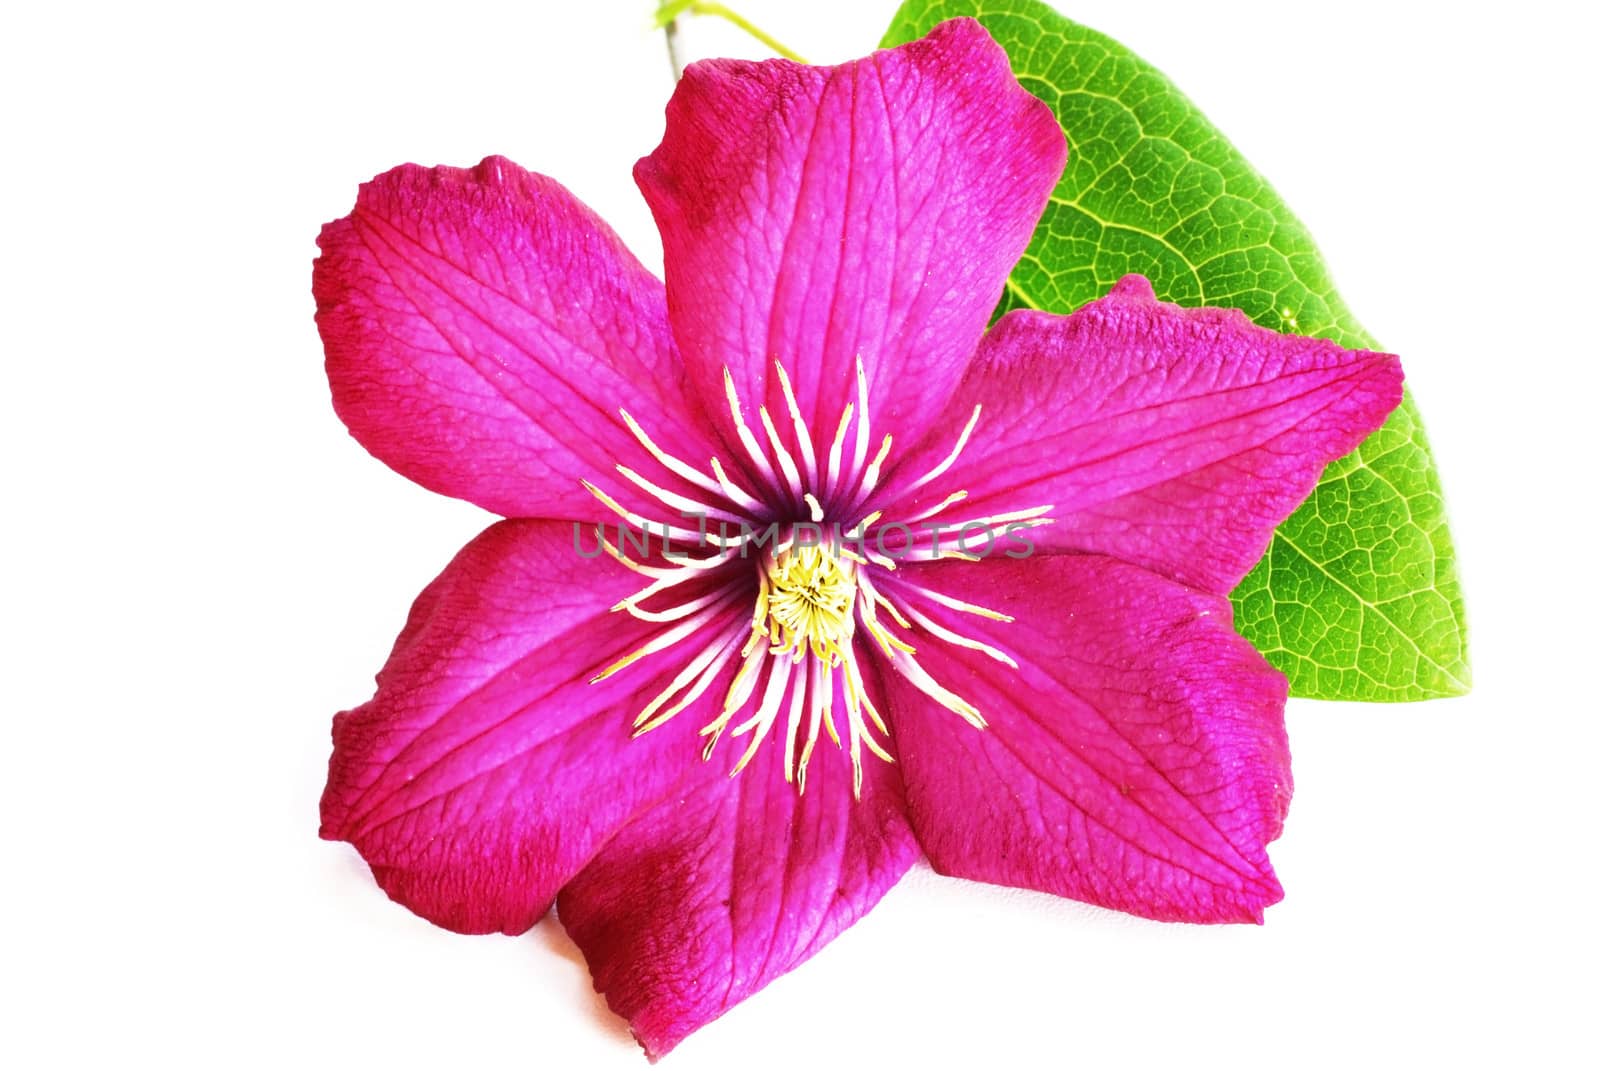 one perfect pink clematis blooming flower closeup